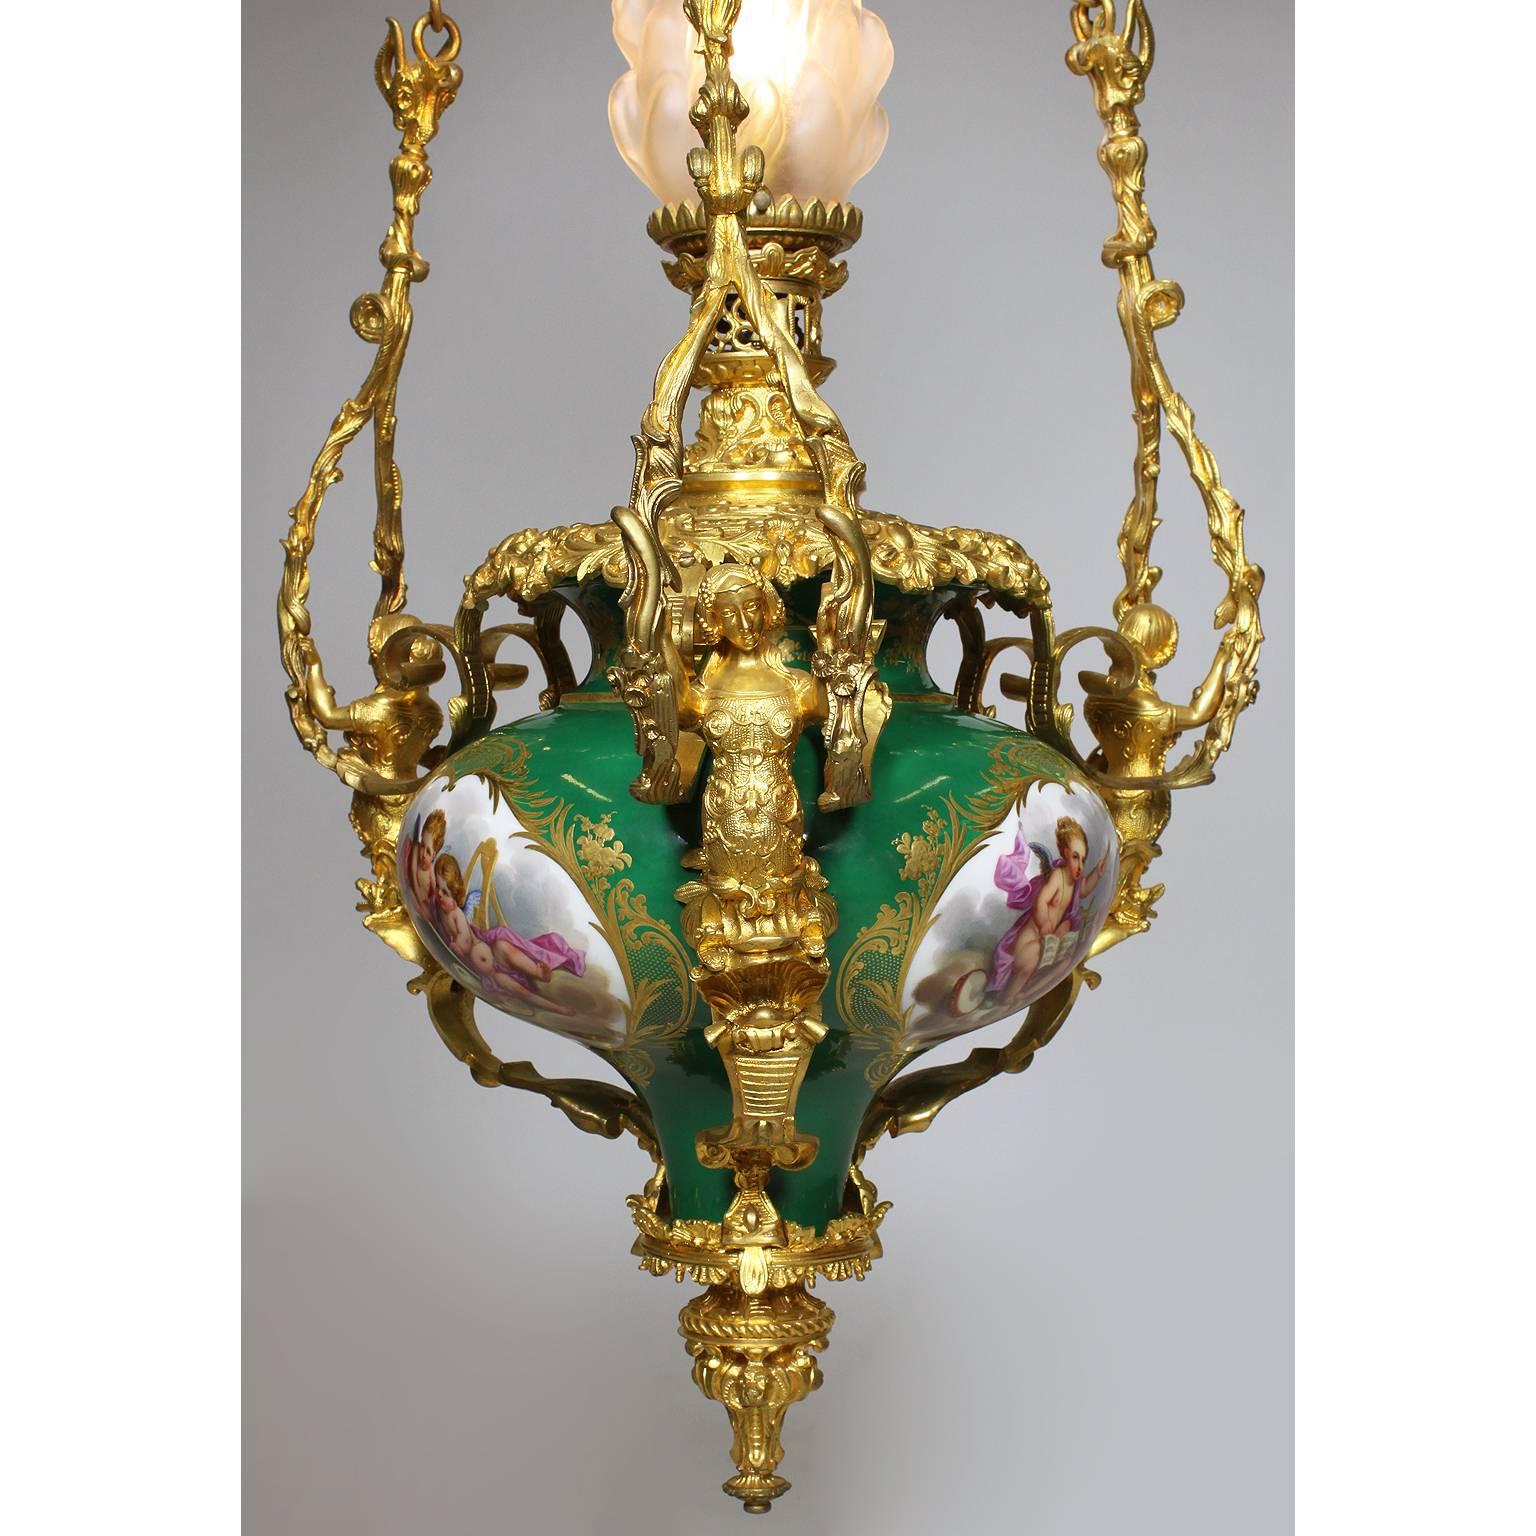 Renaissance Revival French 19th Century Figural Sevres Porcelain and Ormolu Mounted Hanging Lantern